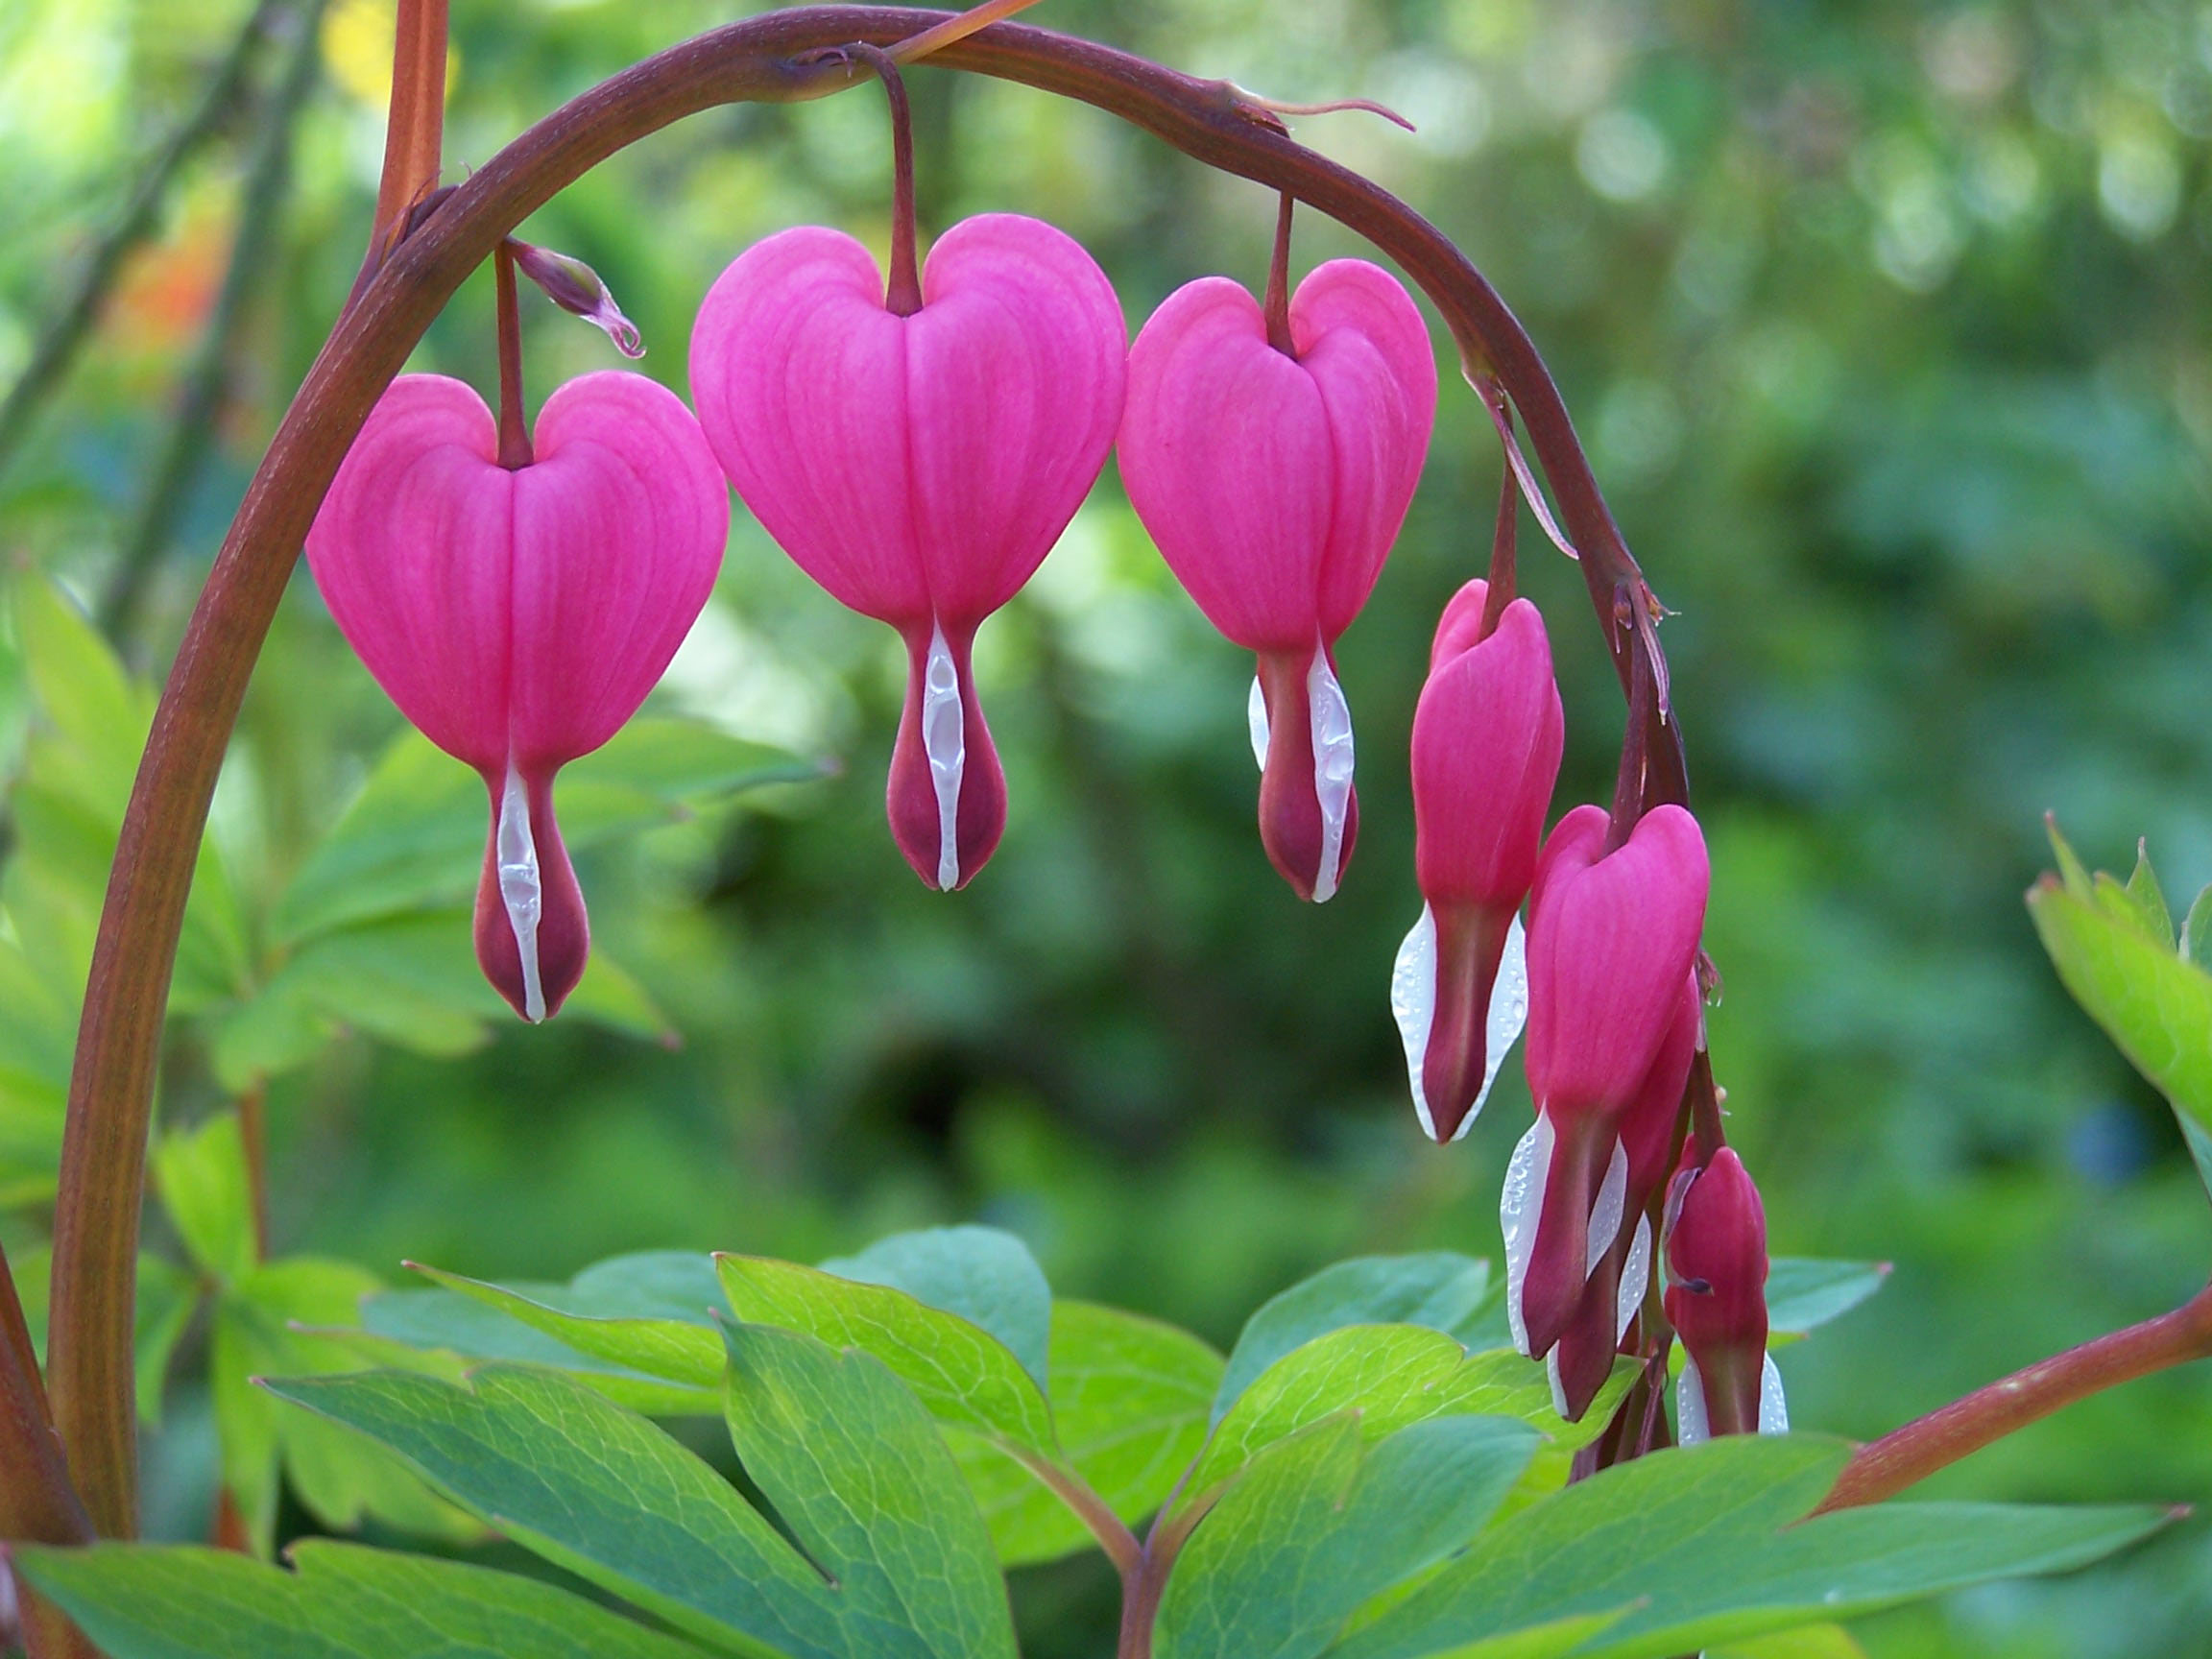 Pink heart-shaped flowers of the Bleeding Heart plant